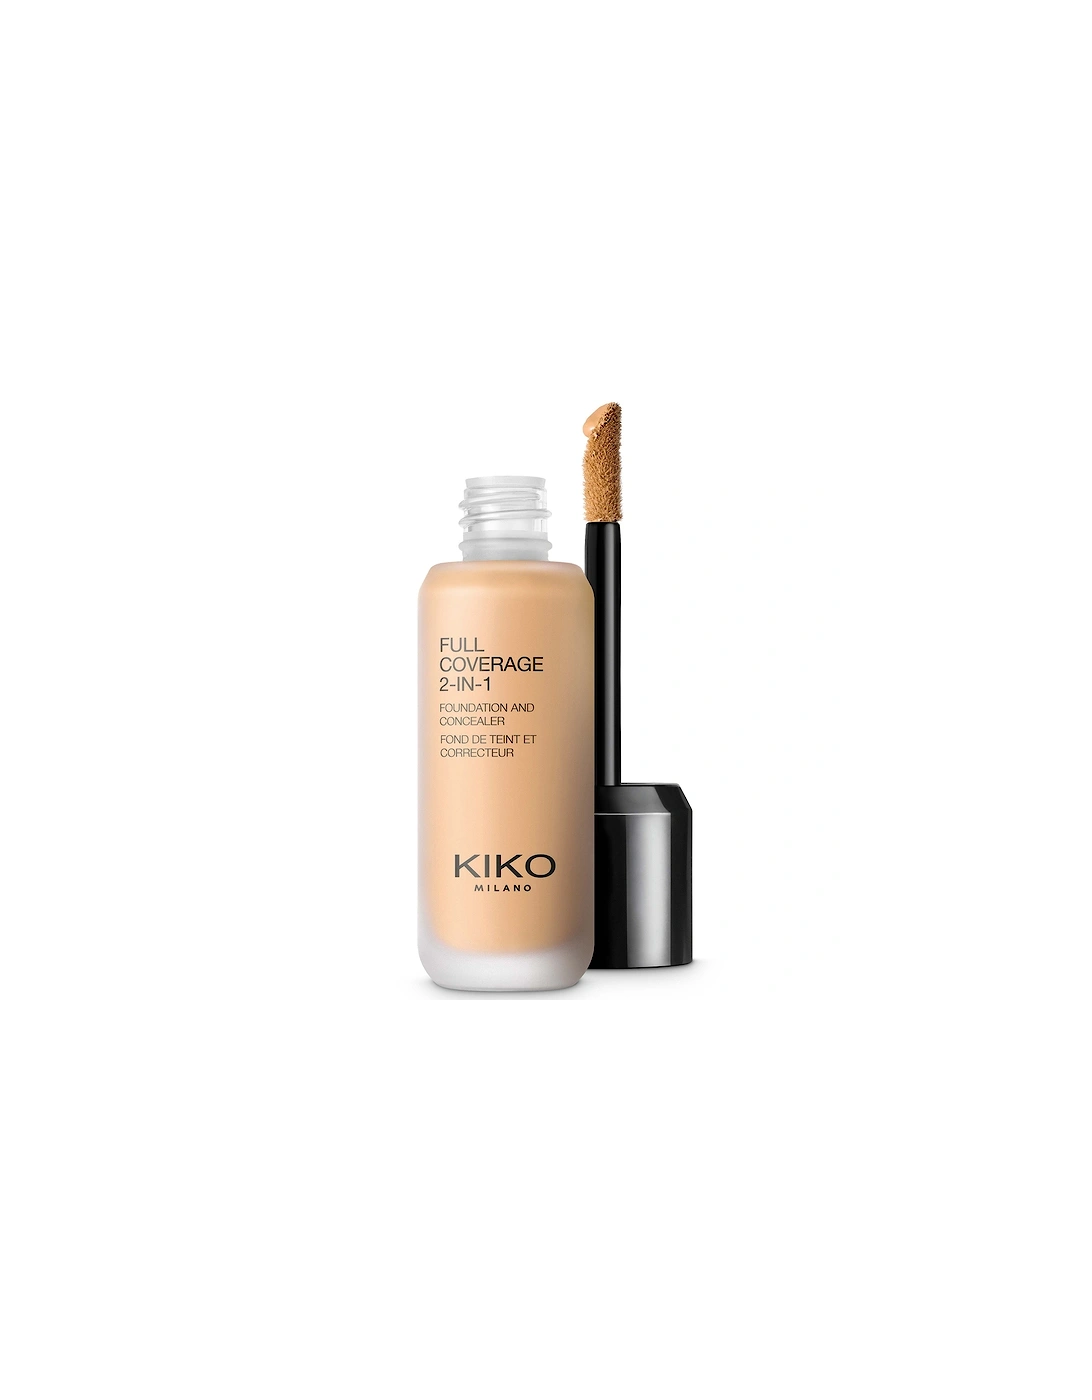 Full Coverage 2-in-1 Foundation and Concealer 25ml - 40 Neutral, 2 of 1